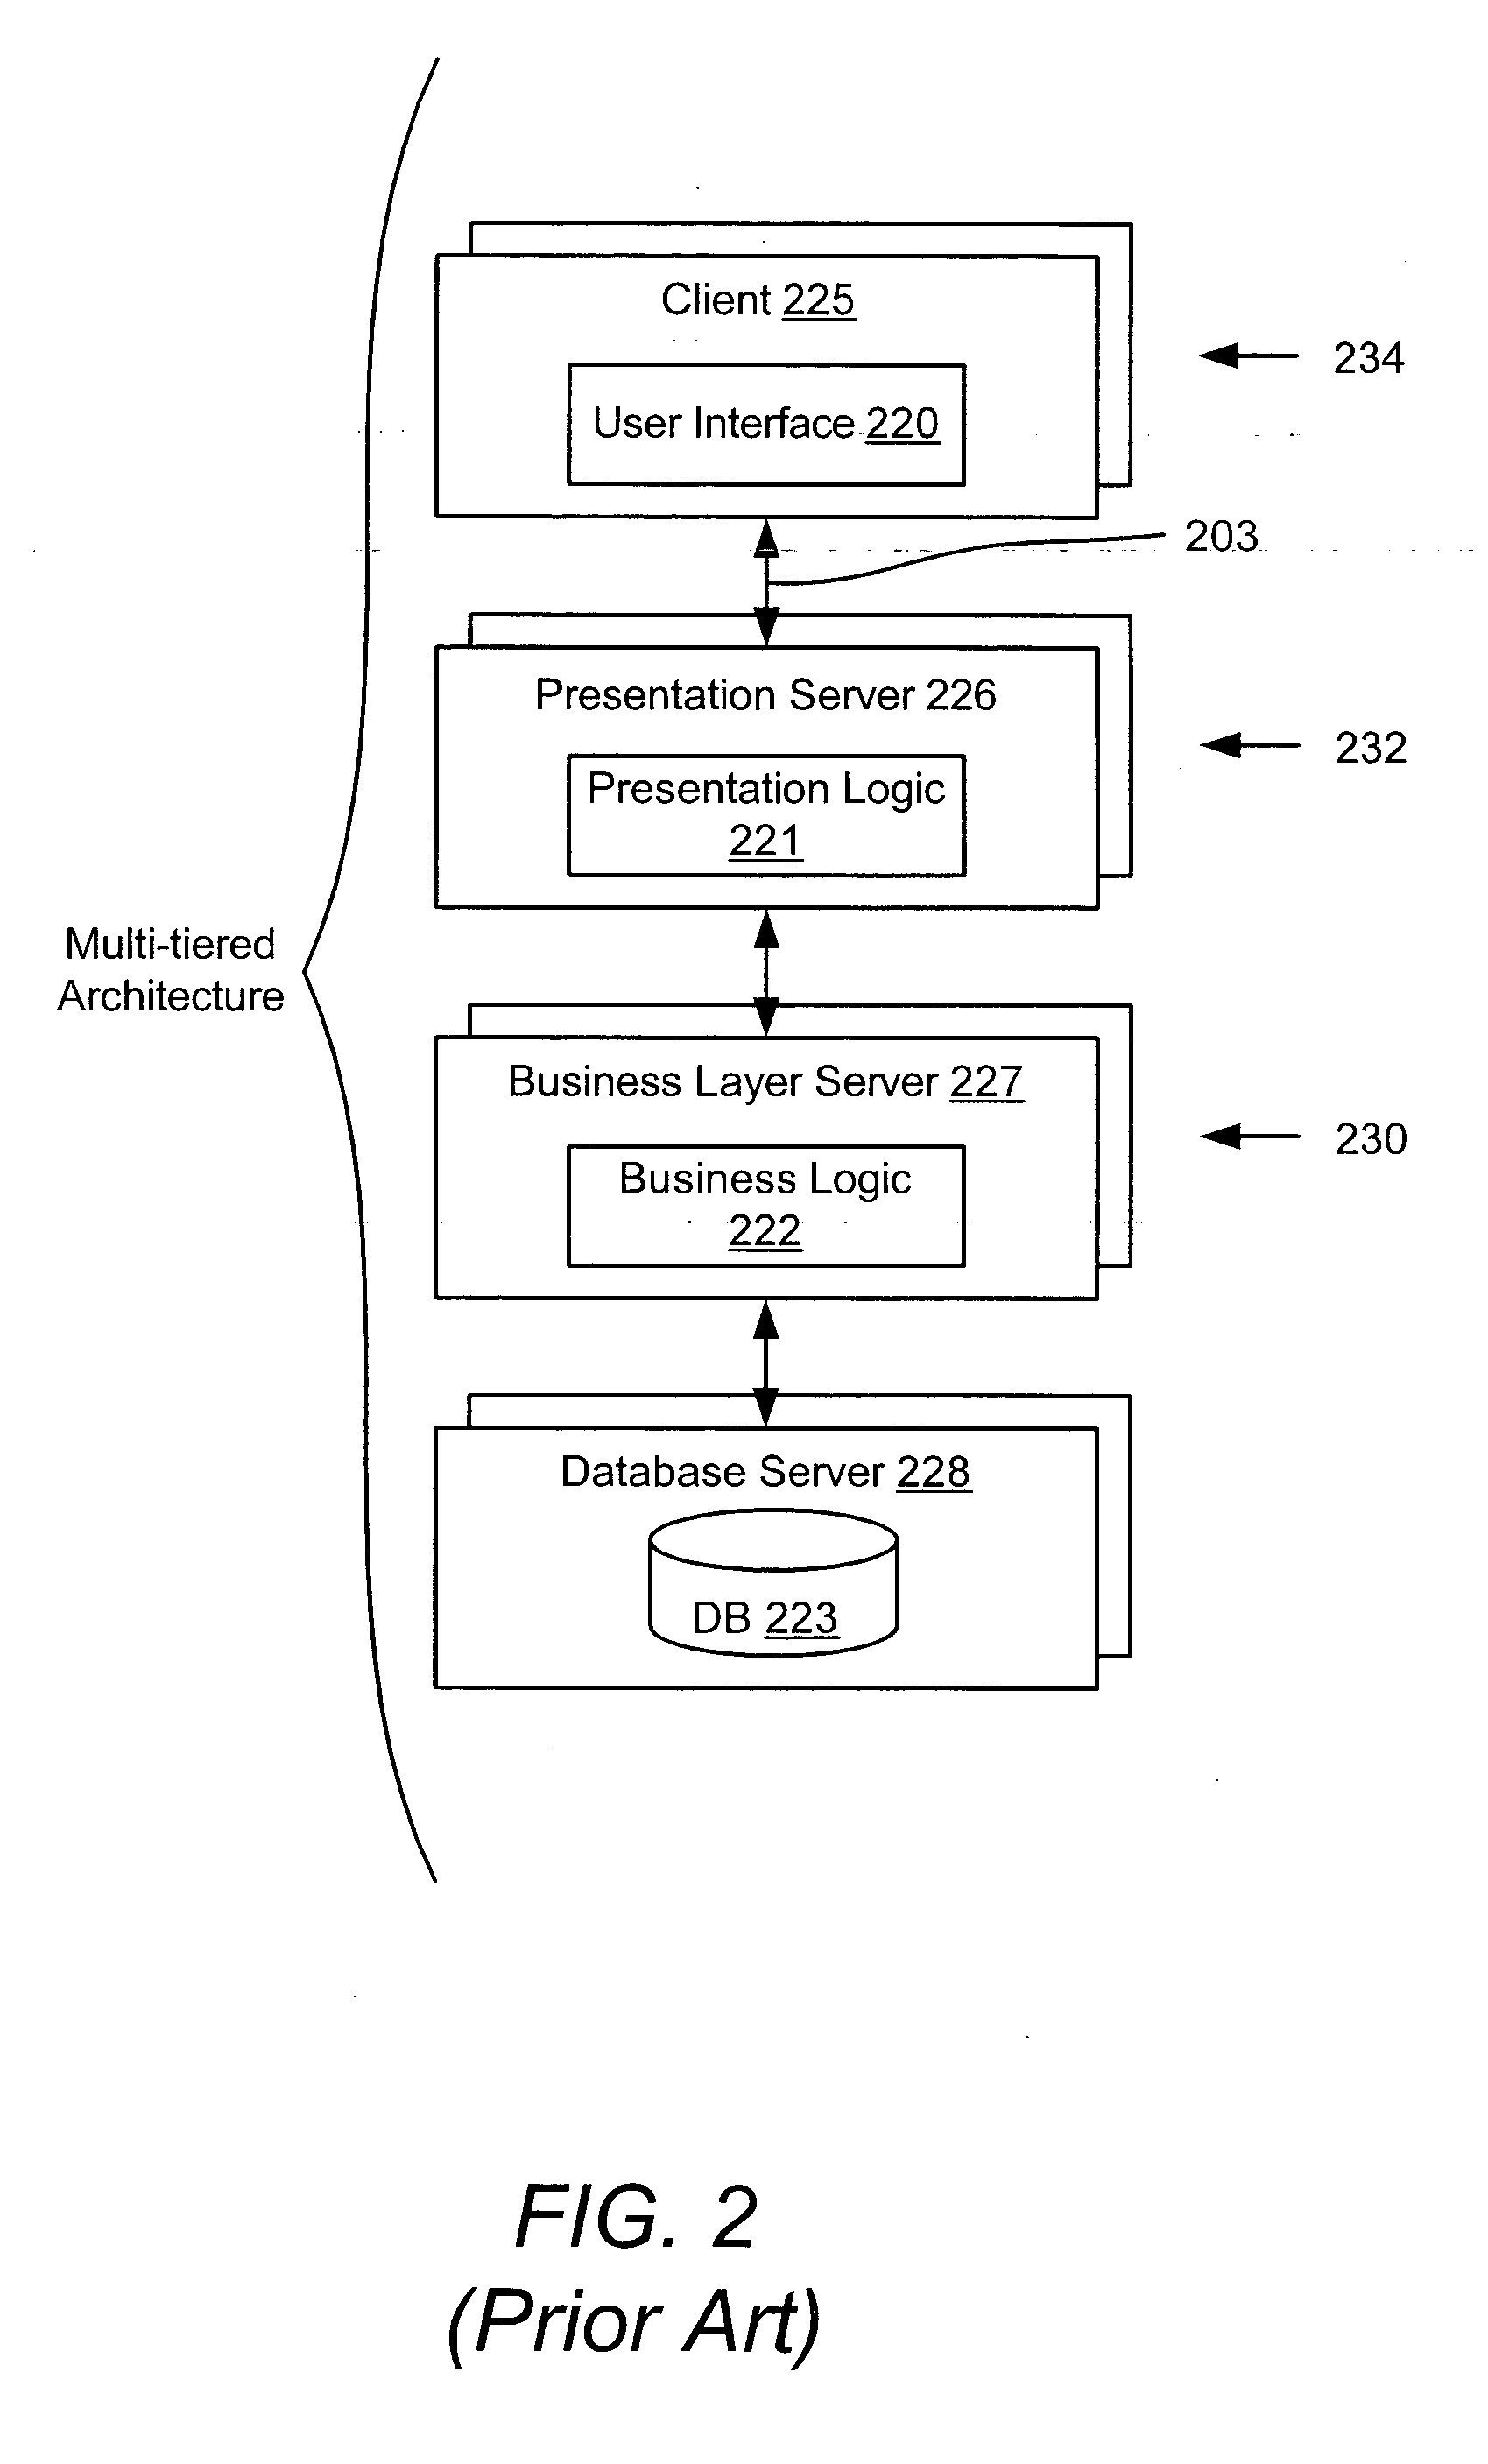 Message-oriented middleware provider having multiple server instances integrated into a clustered application server infrastructure